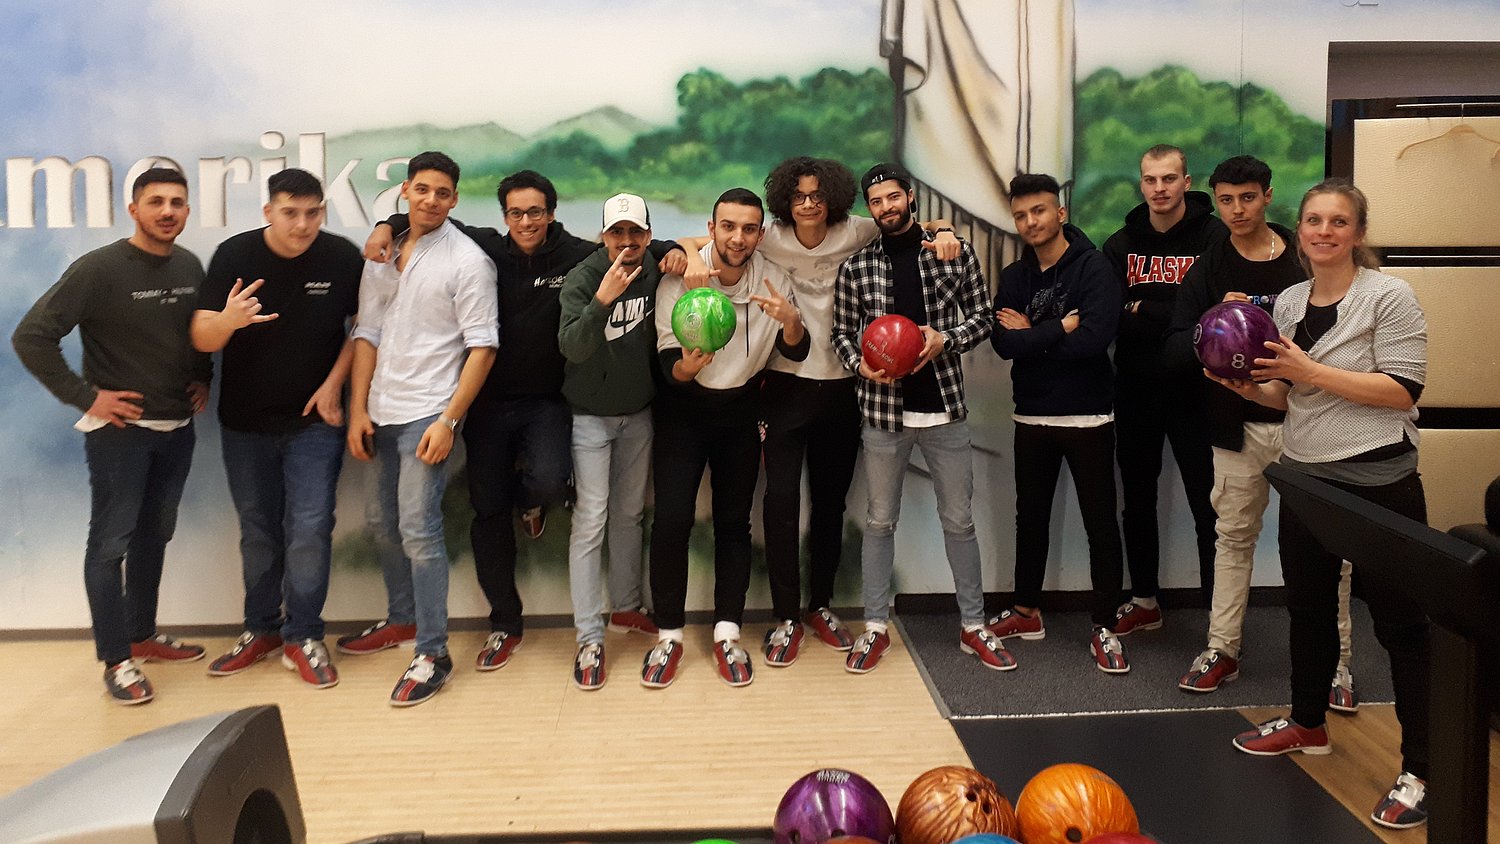 Heroes beim Bowling